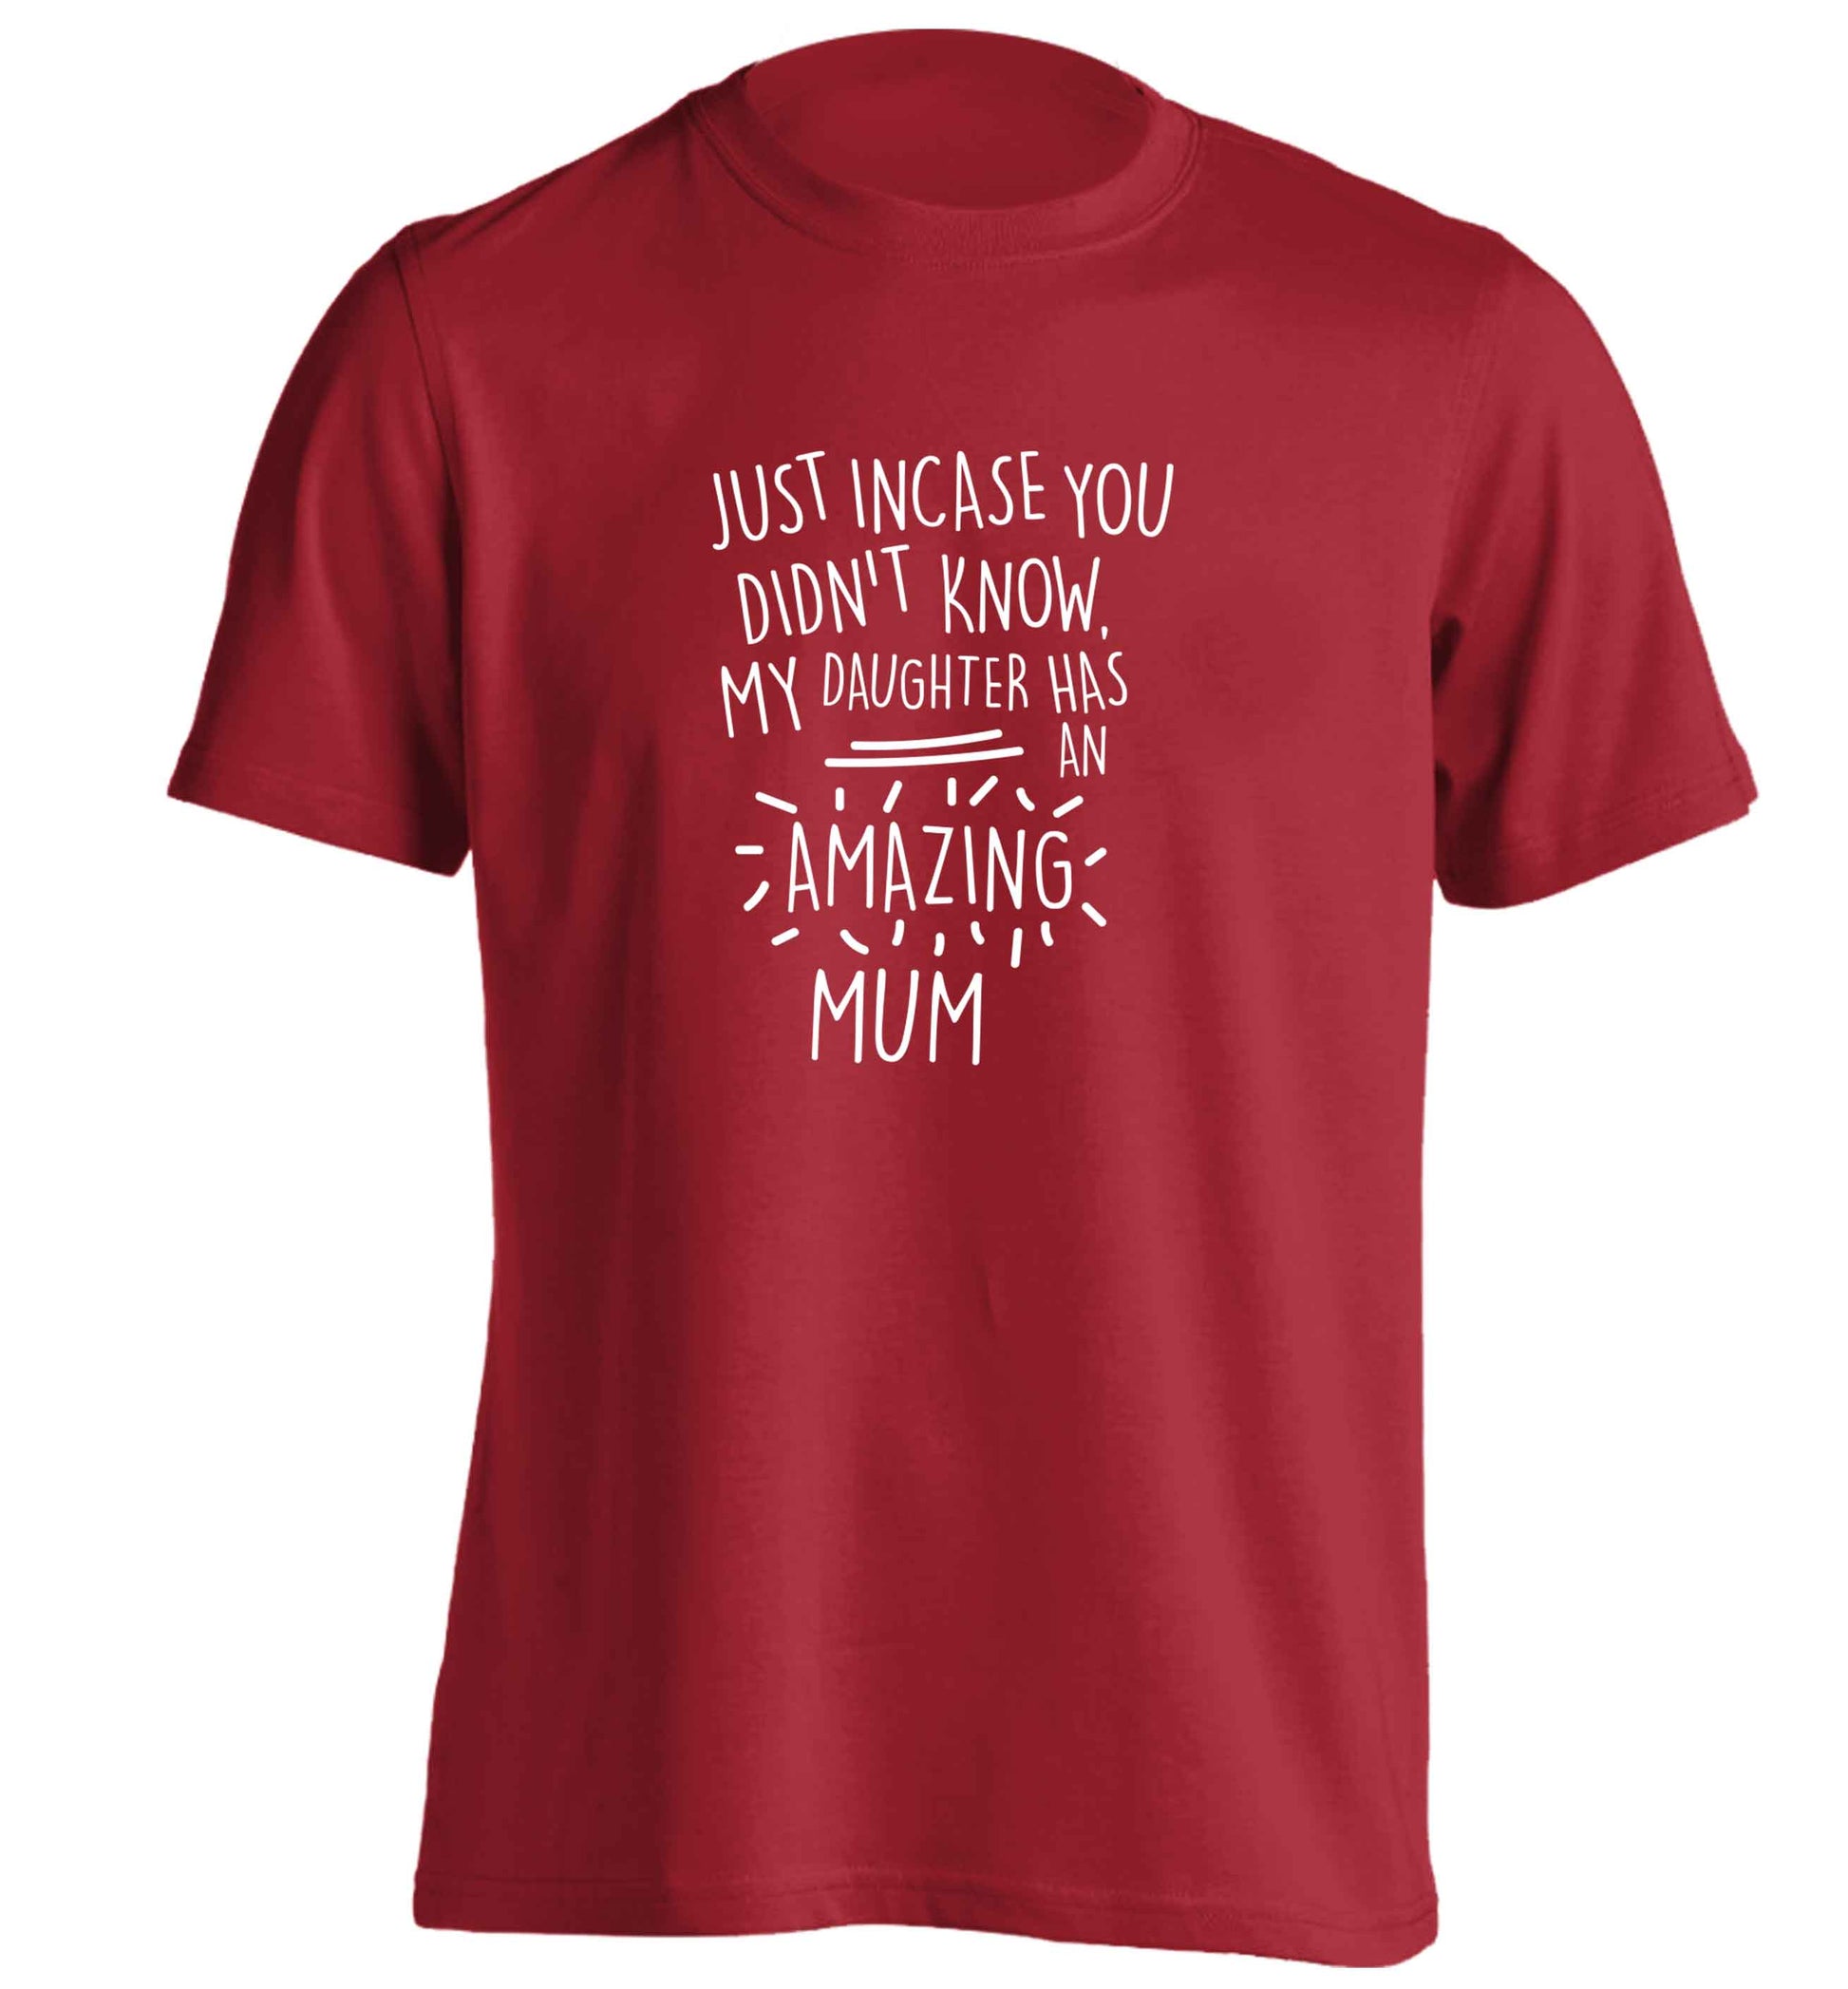 Just incase you didn't know my daughter has an amazing mum adults unisex red Tshirt 2XL